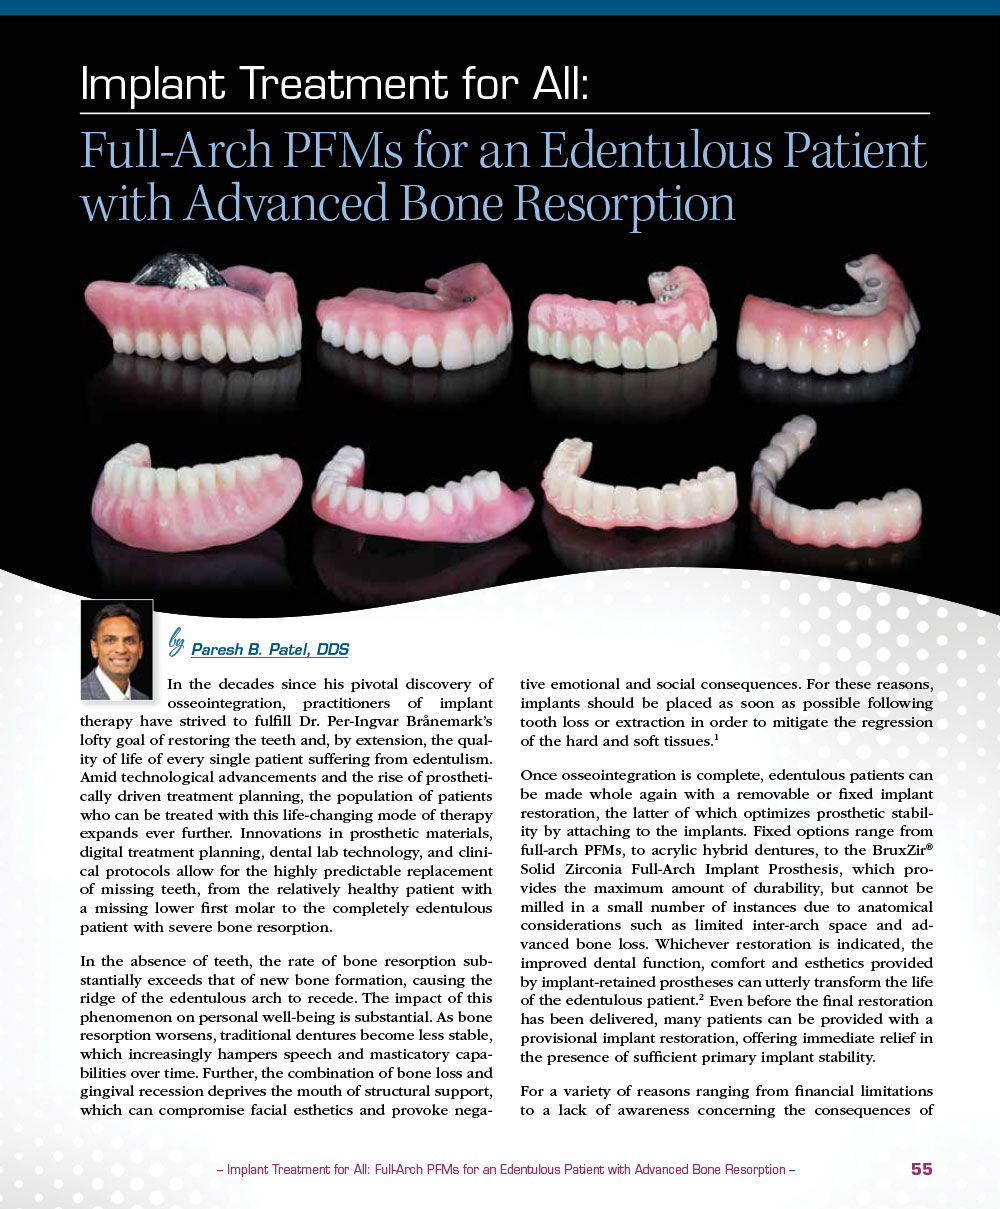 Implant Treatment for All: Full-Arch PFMs for an Edentulous Patient with Advanced Bone Resorption